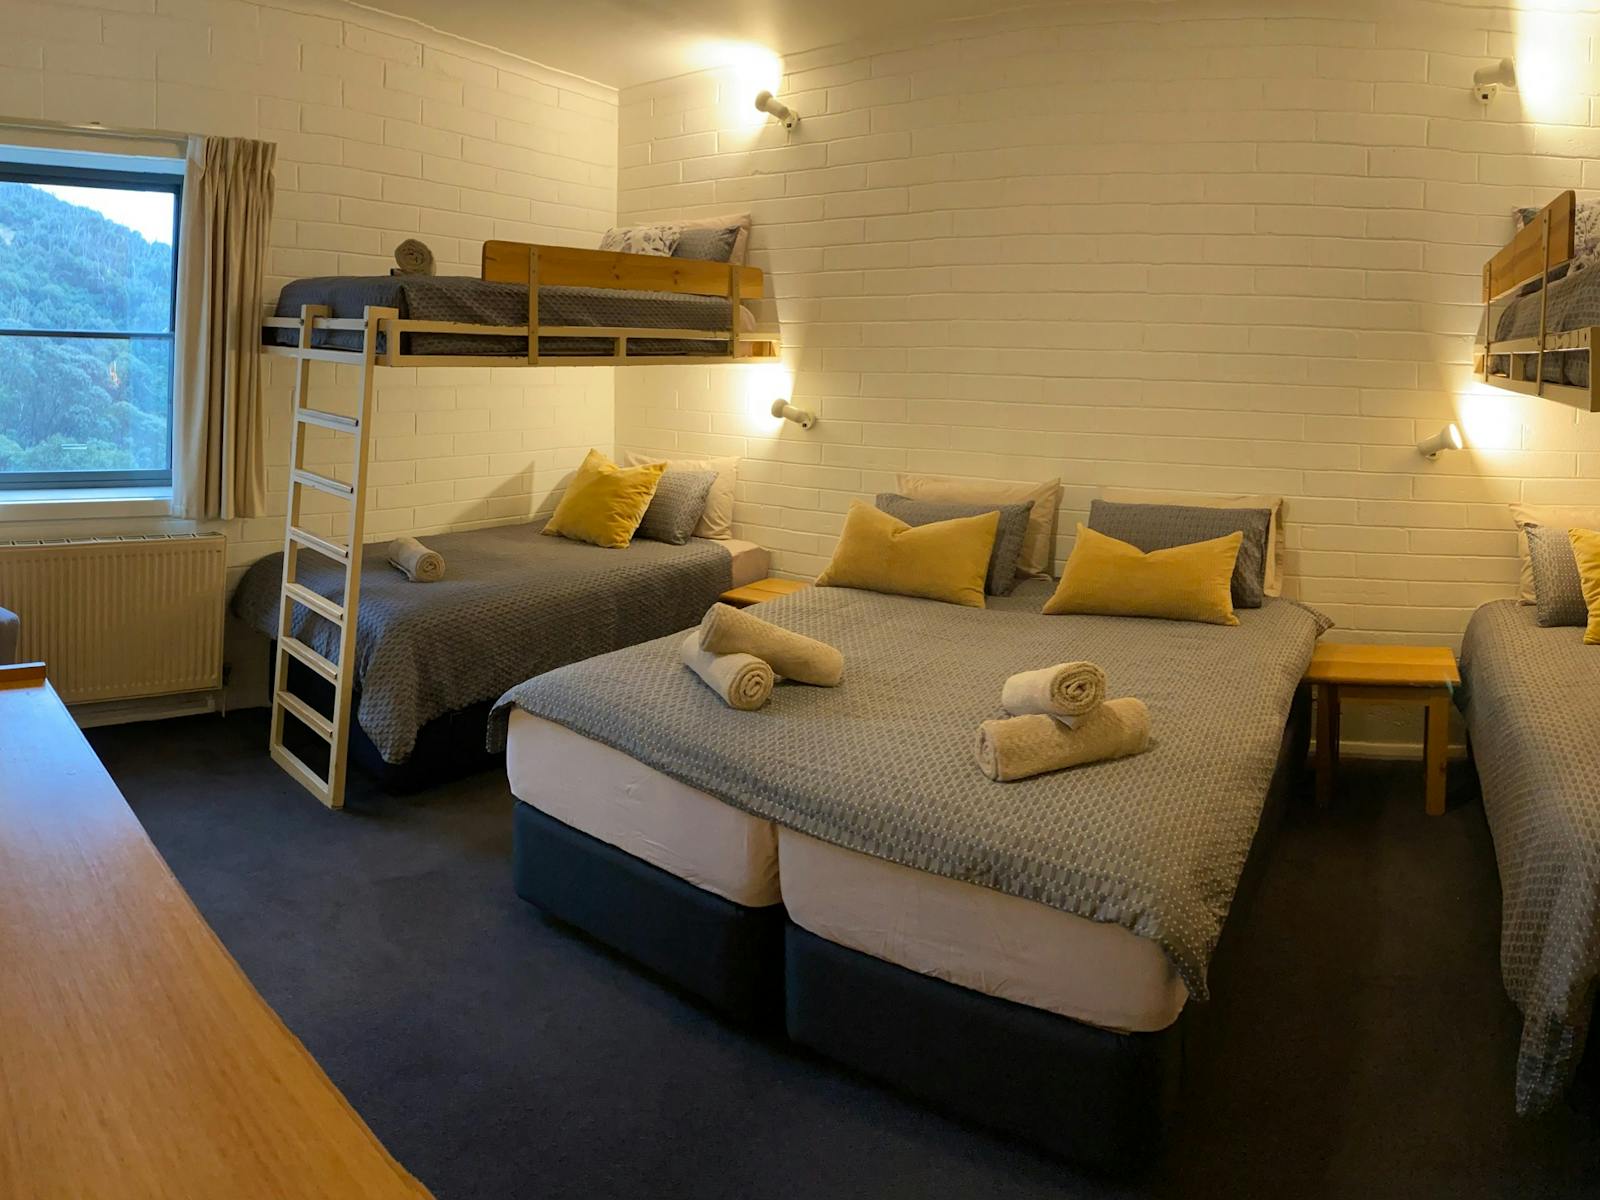 example of a family/bunk room